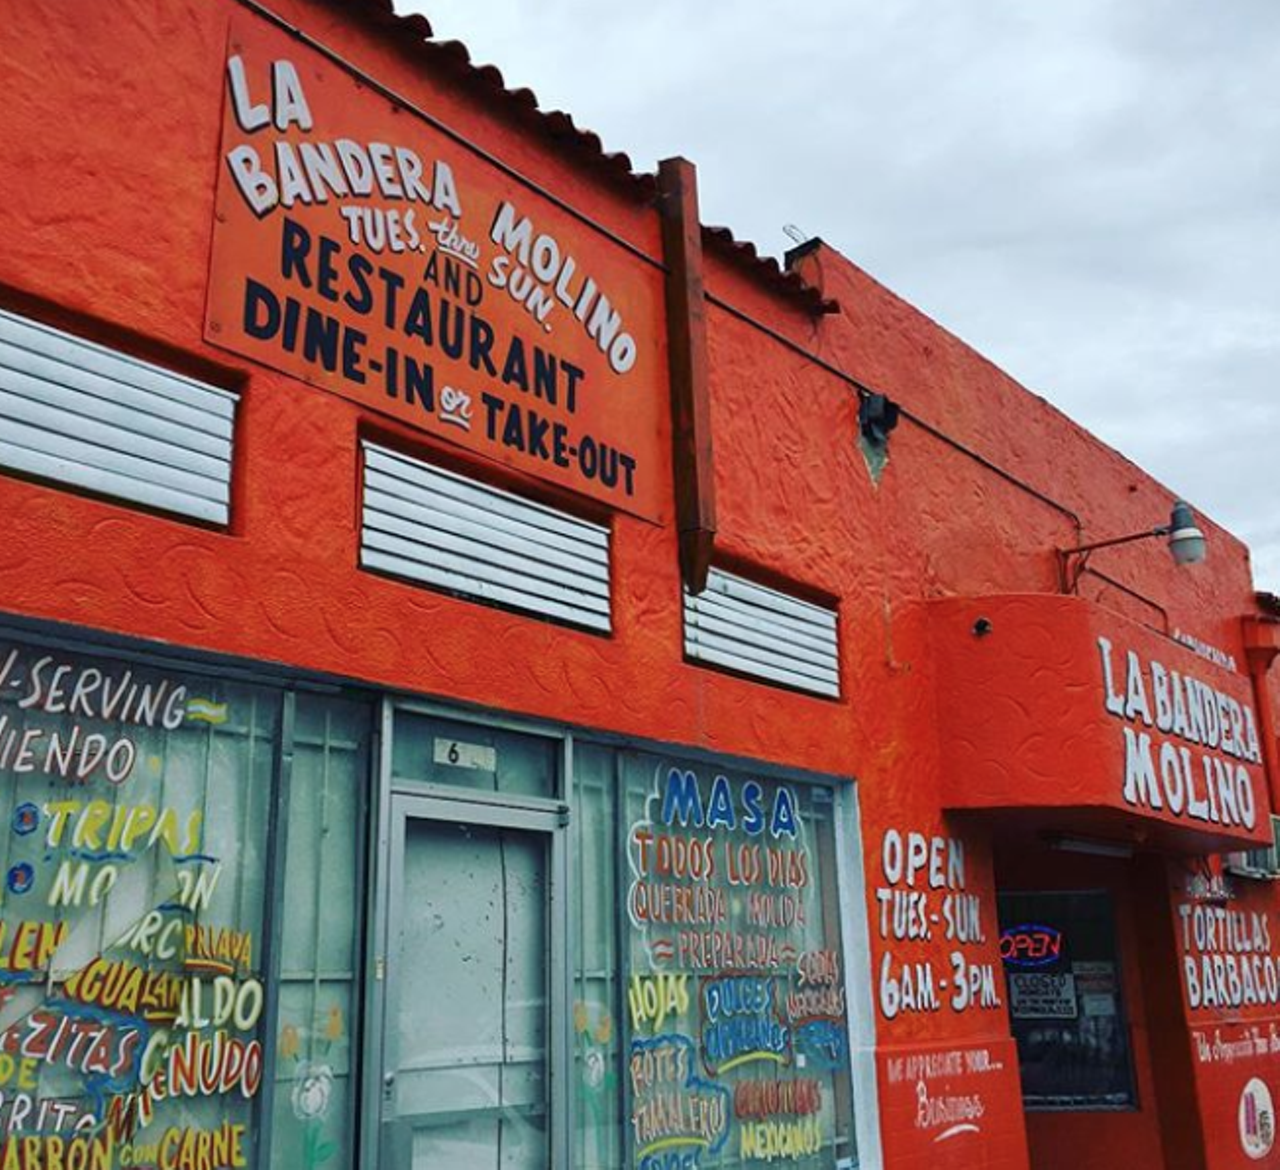 La Bandera Molino
2619 N Zarzamora, (210) 434-0631
Some of the best barbacoa in all the land is made at this tiny shop that’s part mercado, part restaurant. Go there for the menudo and the breakfast tacos.
Photo via Instagram / tbonegetit